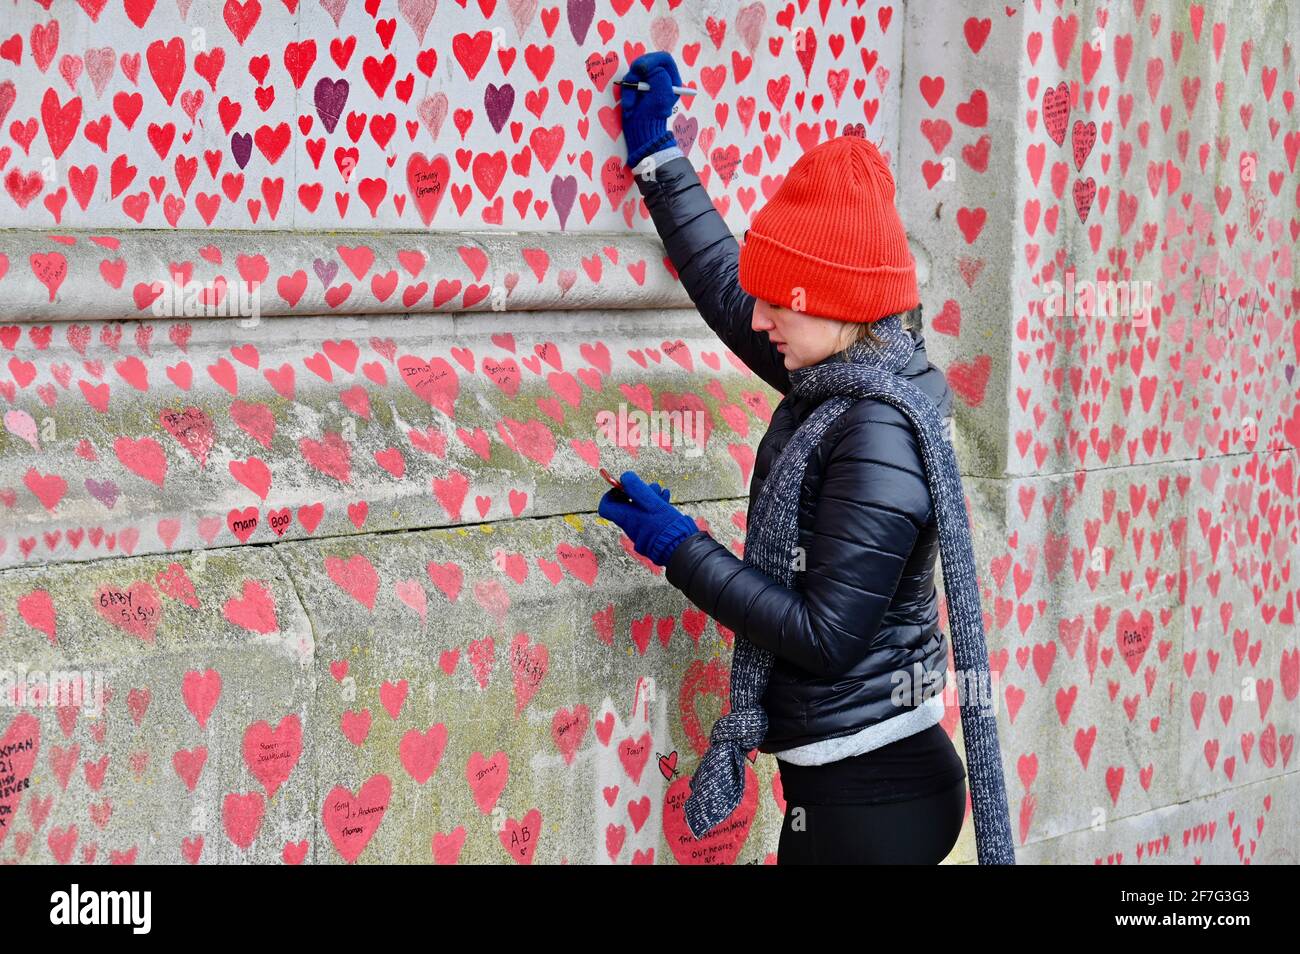 London. UK. Hearts continue to be added to the National Covid Memorial Wall at St. Thomas' Hospital Westminster, in memory of those who have died from coronavirus during the pandemic. Stock Photo